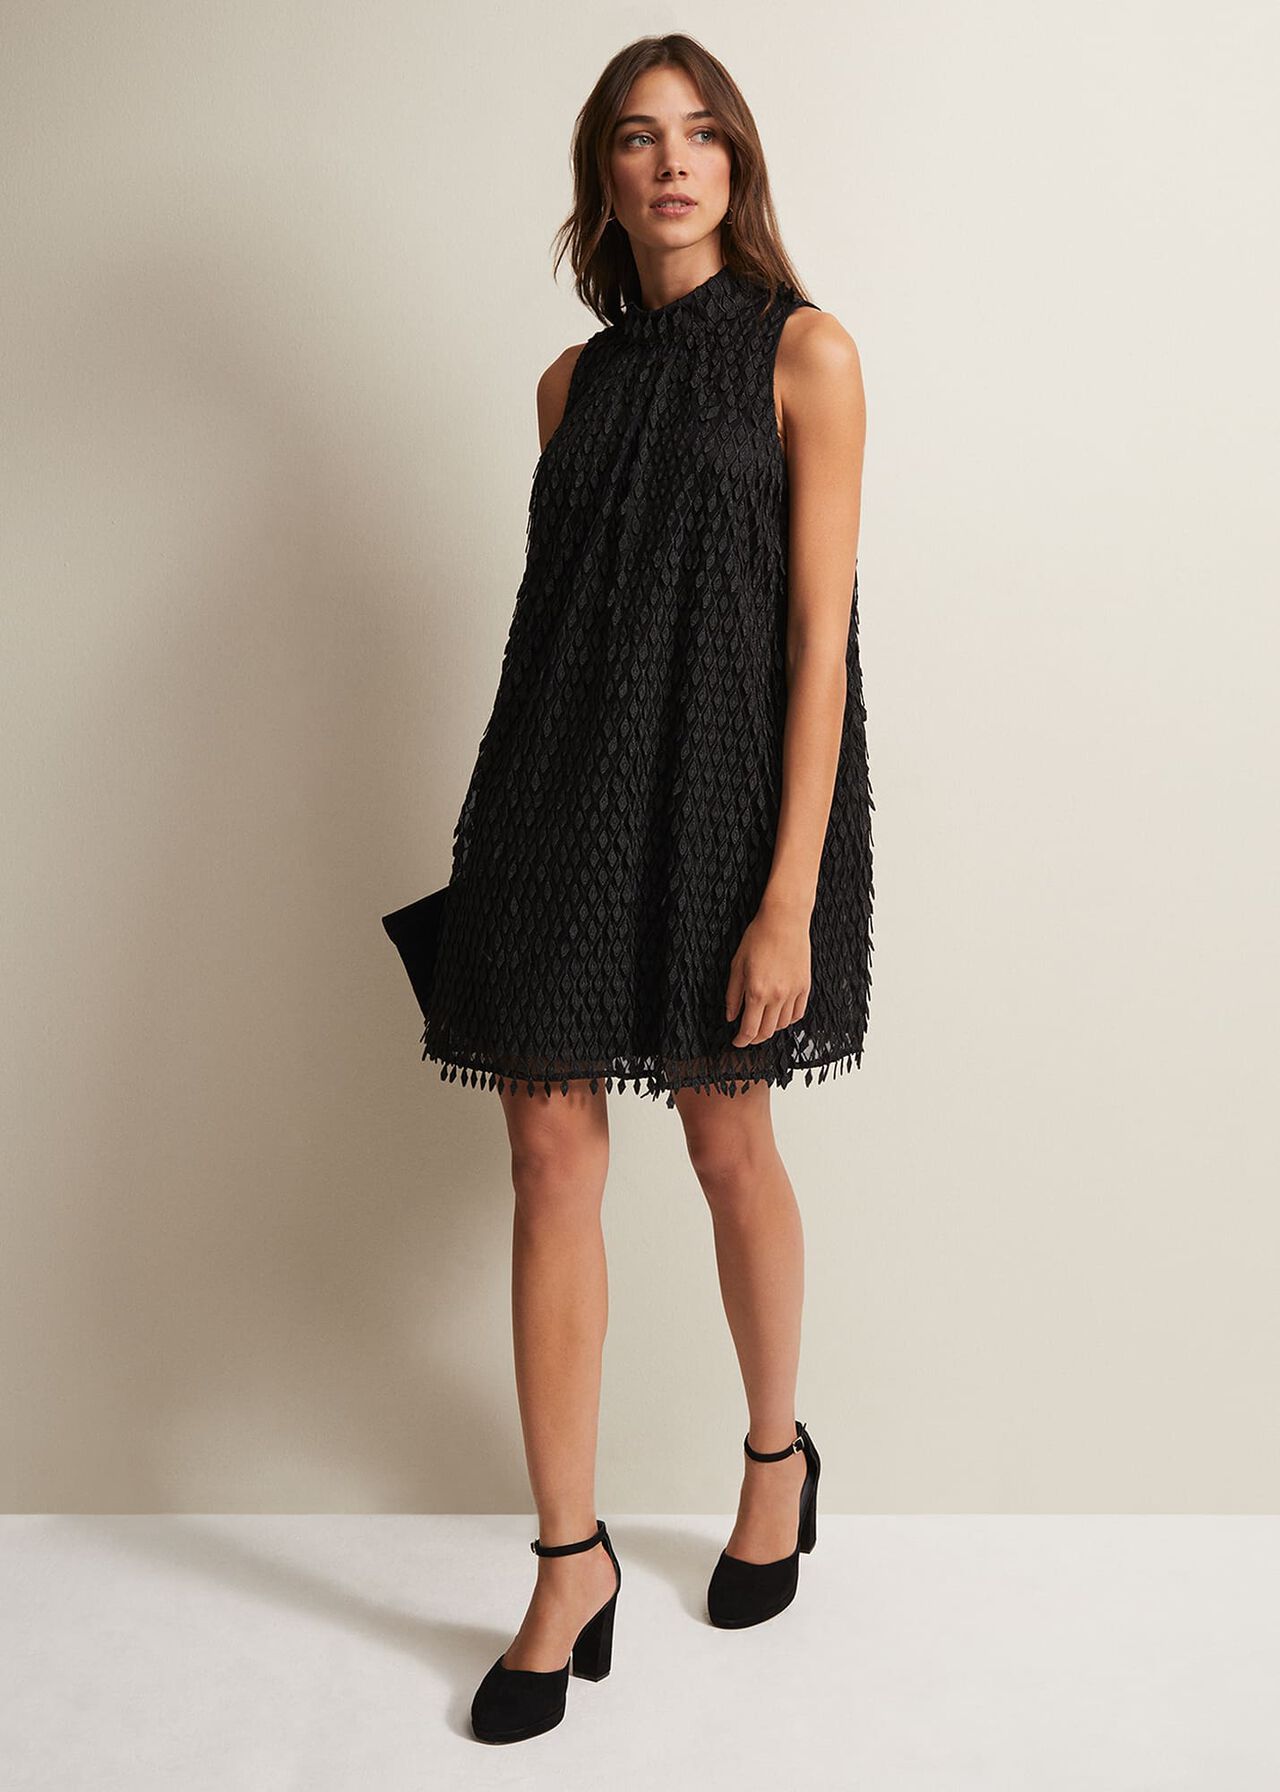 Black Shift Mini Dress with Textured Detail | Phase Eight